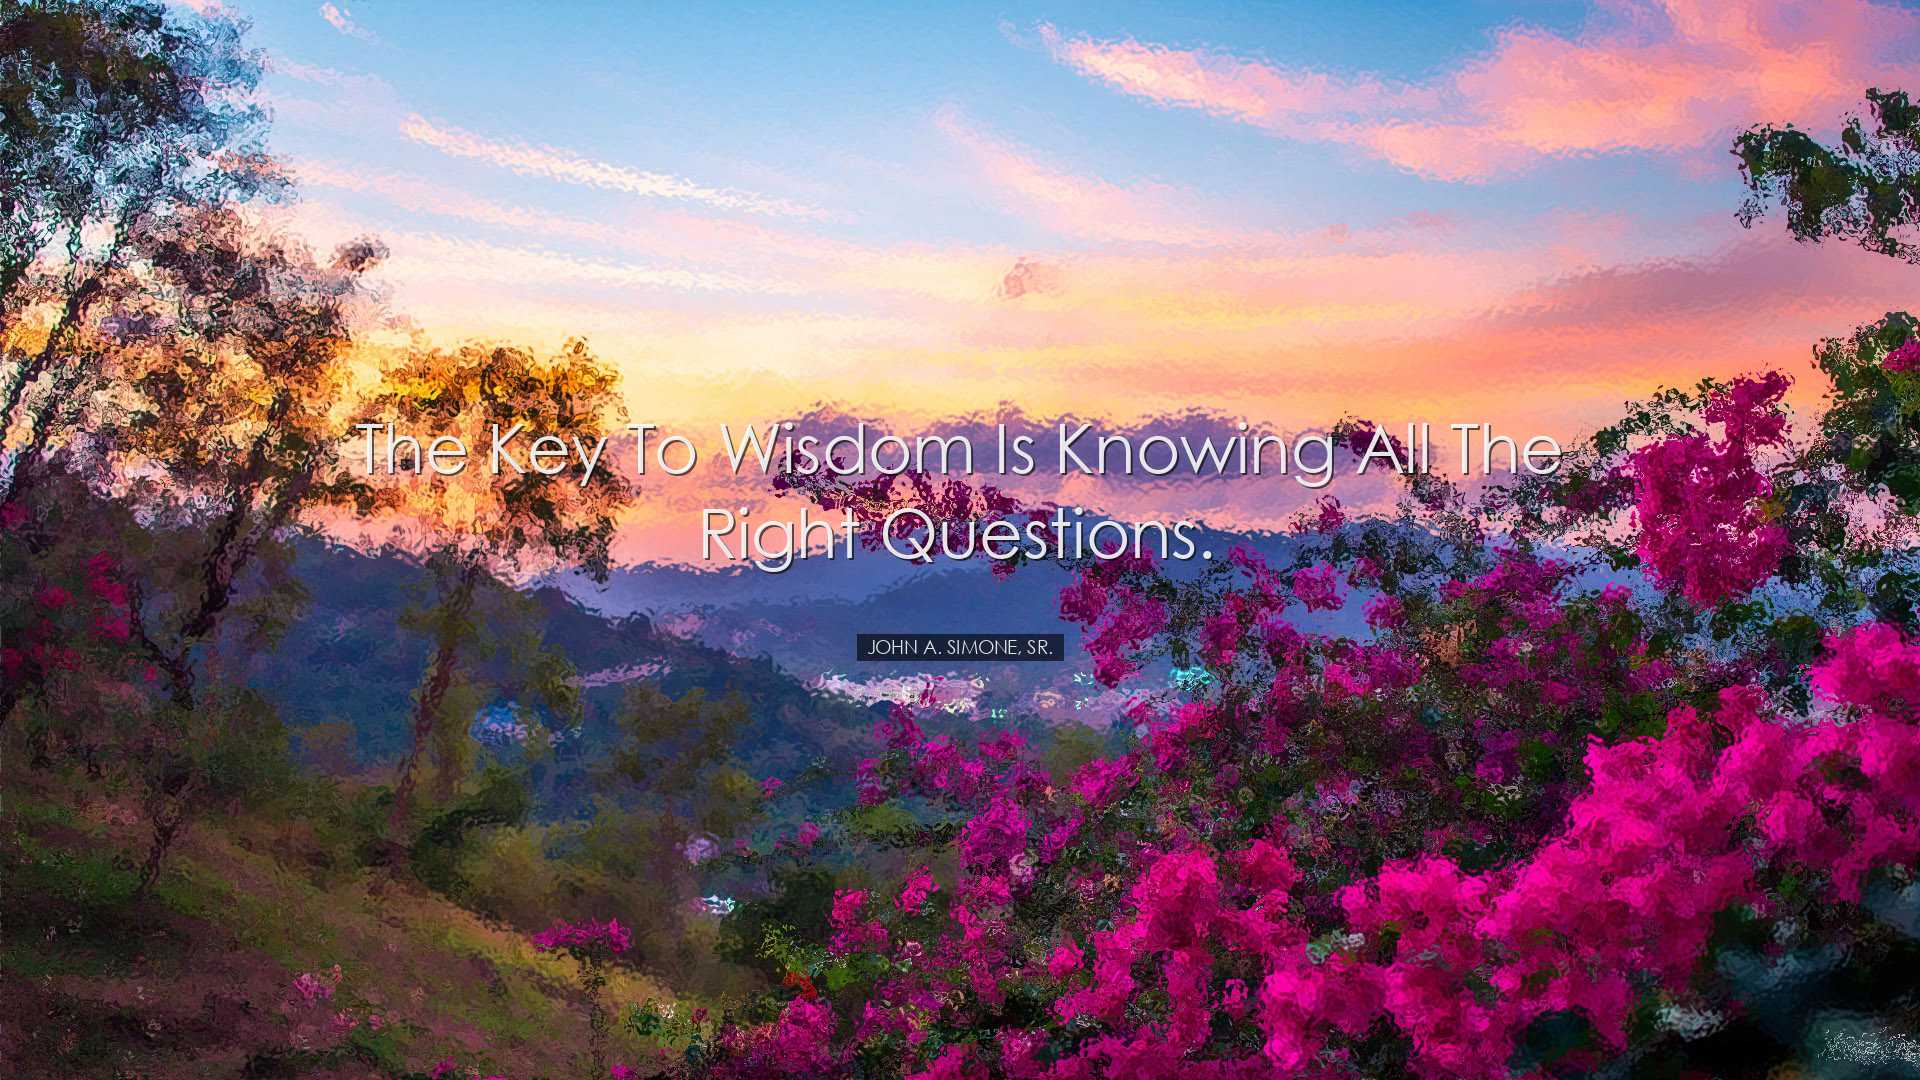 The key to wisdom is knowing all the right questions. - John A. Si